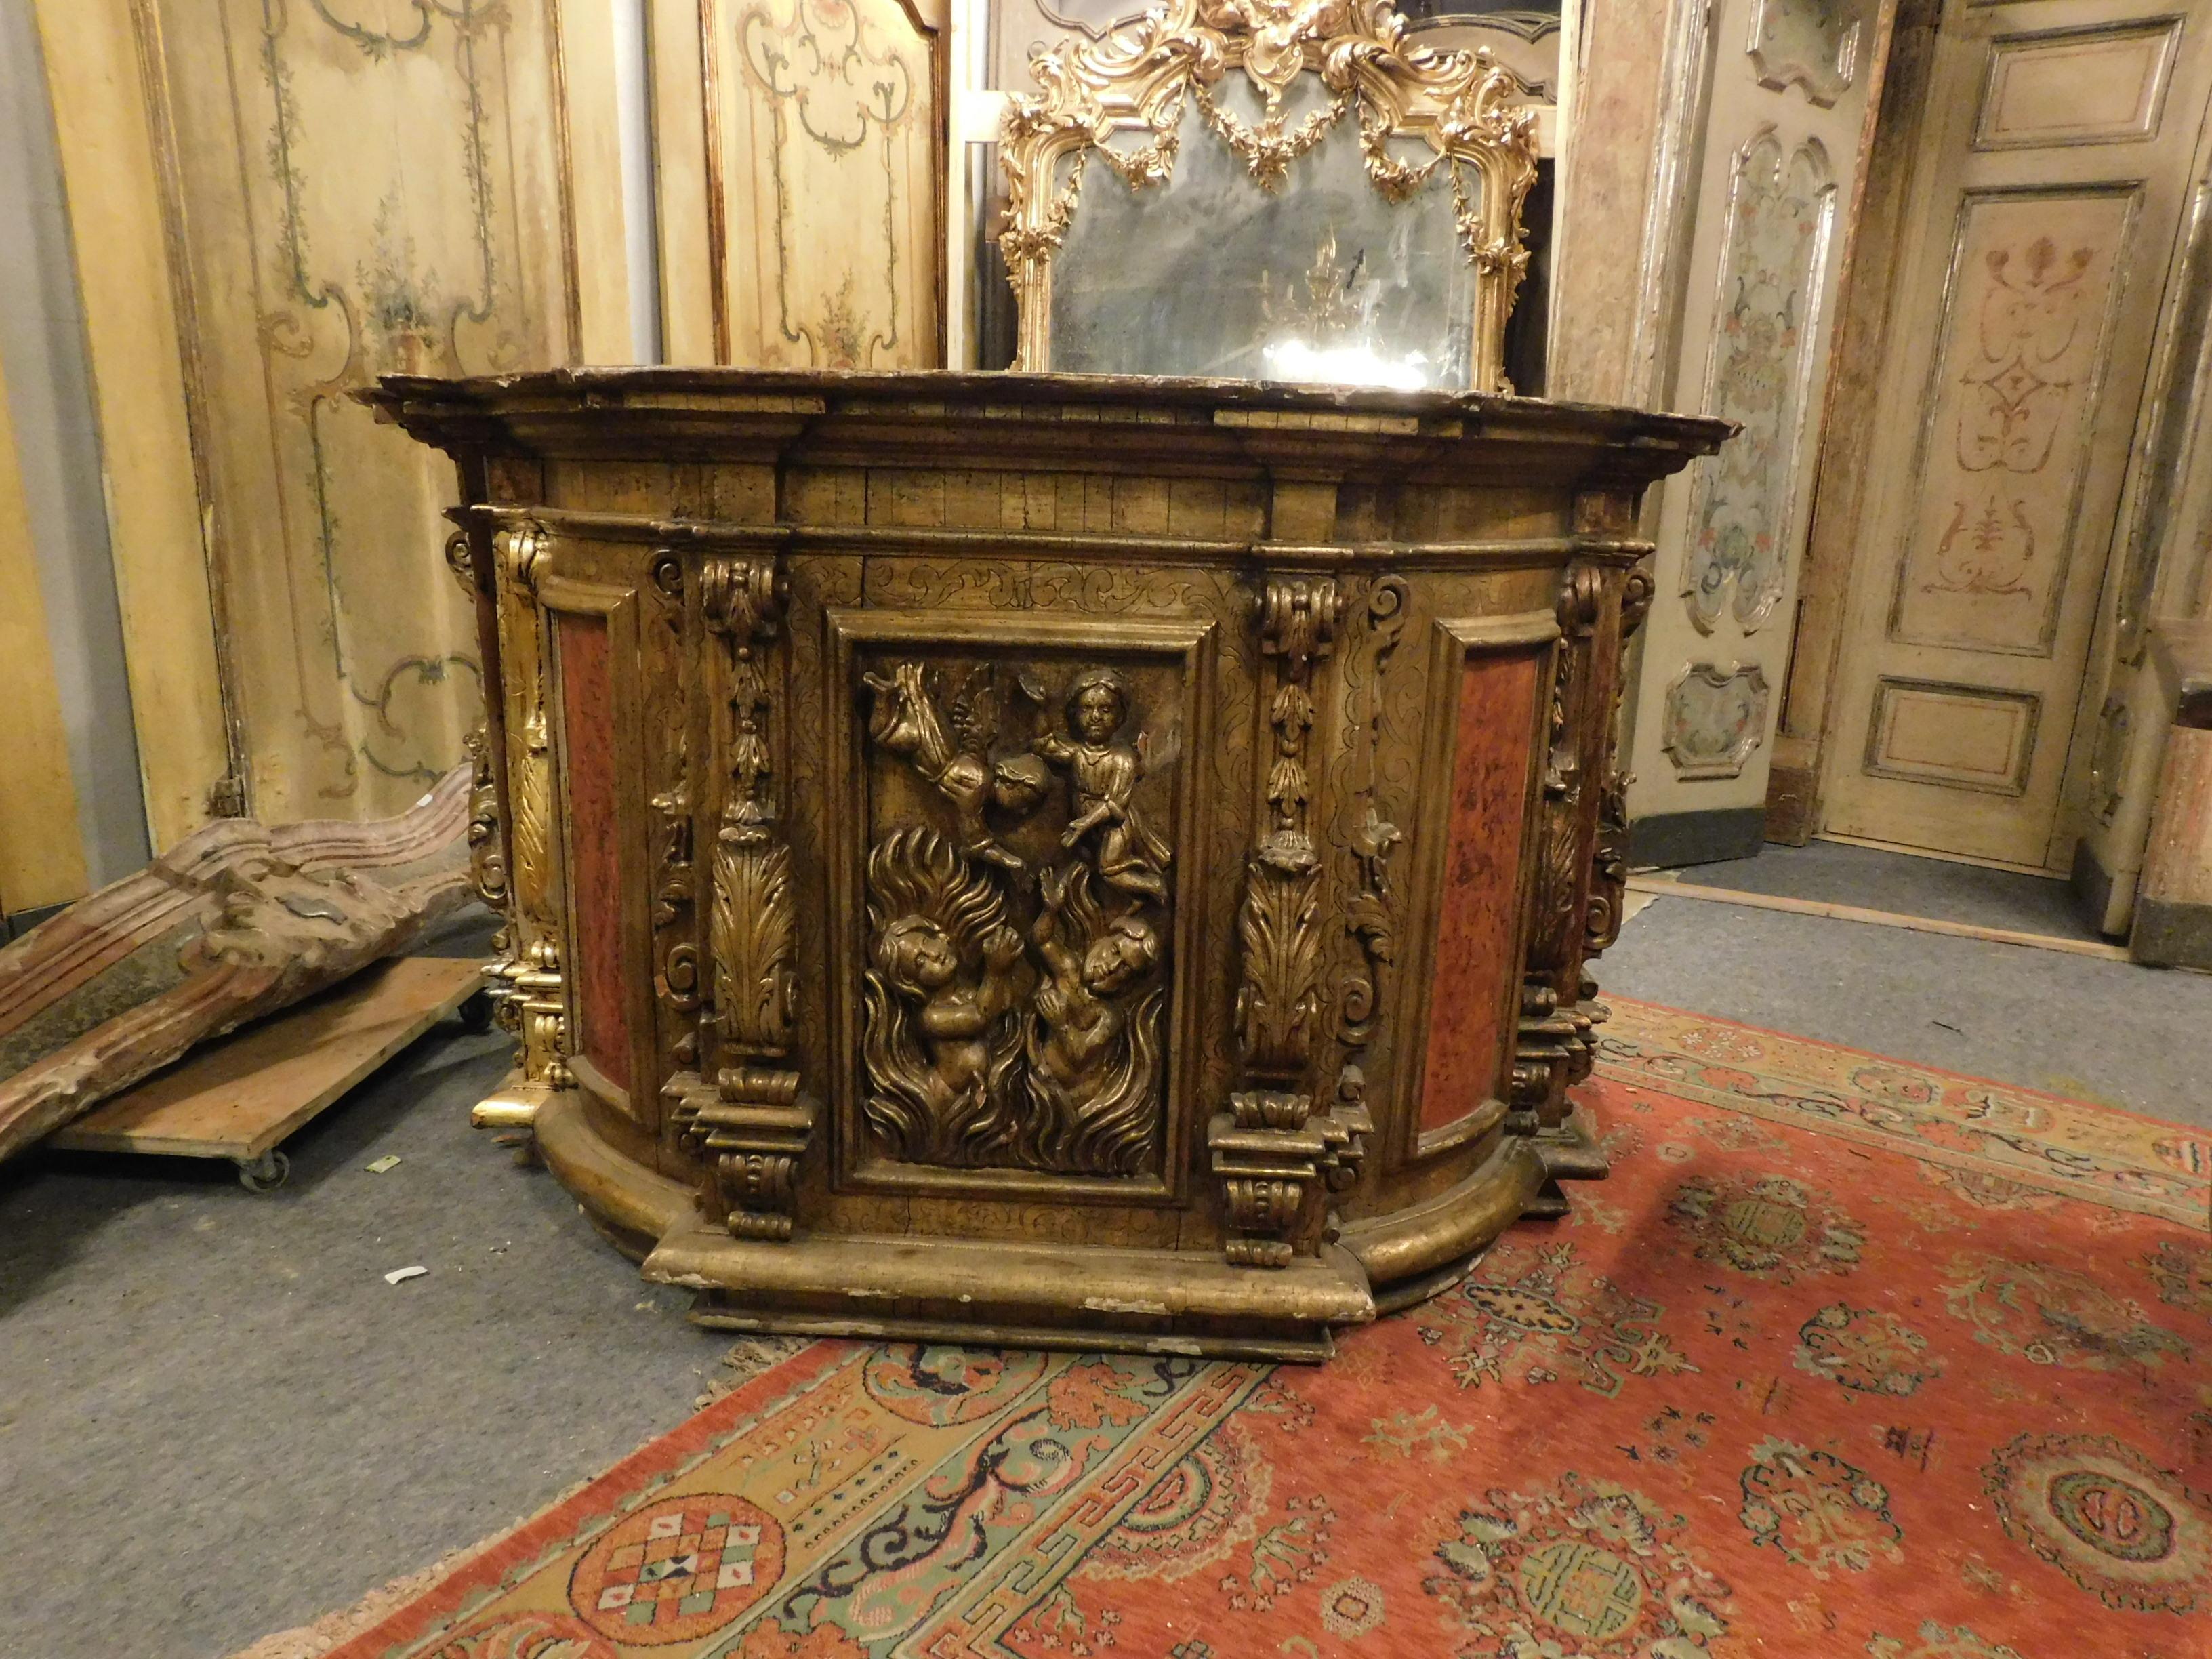 Ancient church pulpit in larch wood, silvered, gilded and richly carved by hand, built in the middle of the 16th century for an important church in Naples (Italy).
Beautiful sculpture with representation of hell and heaven, very rich sculpture and